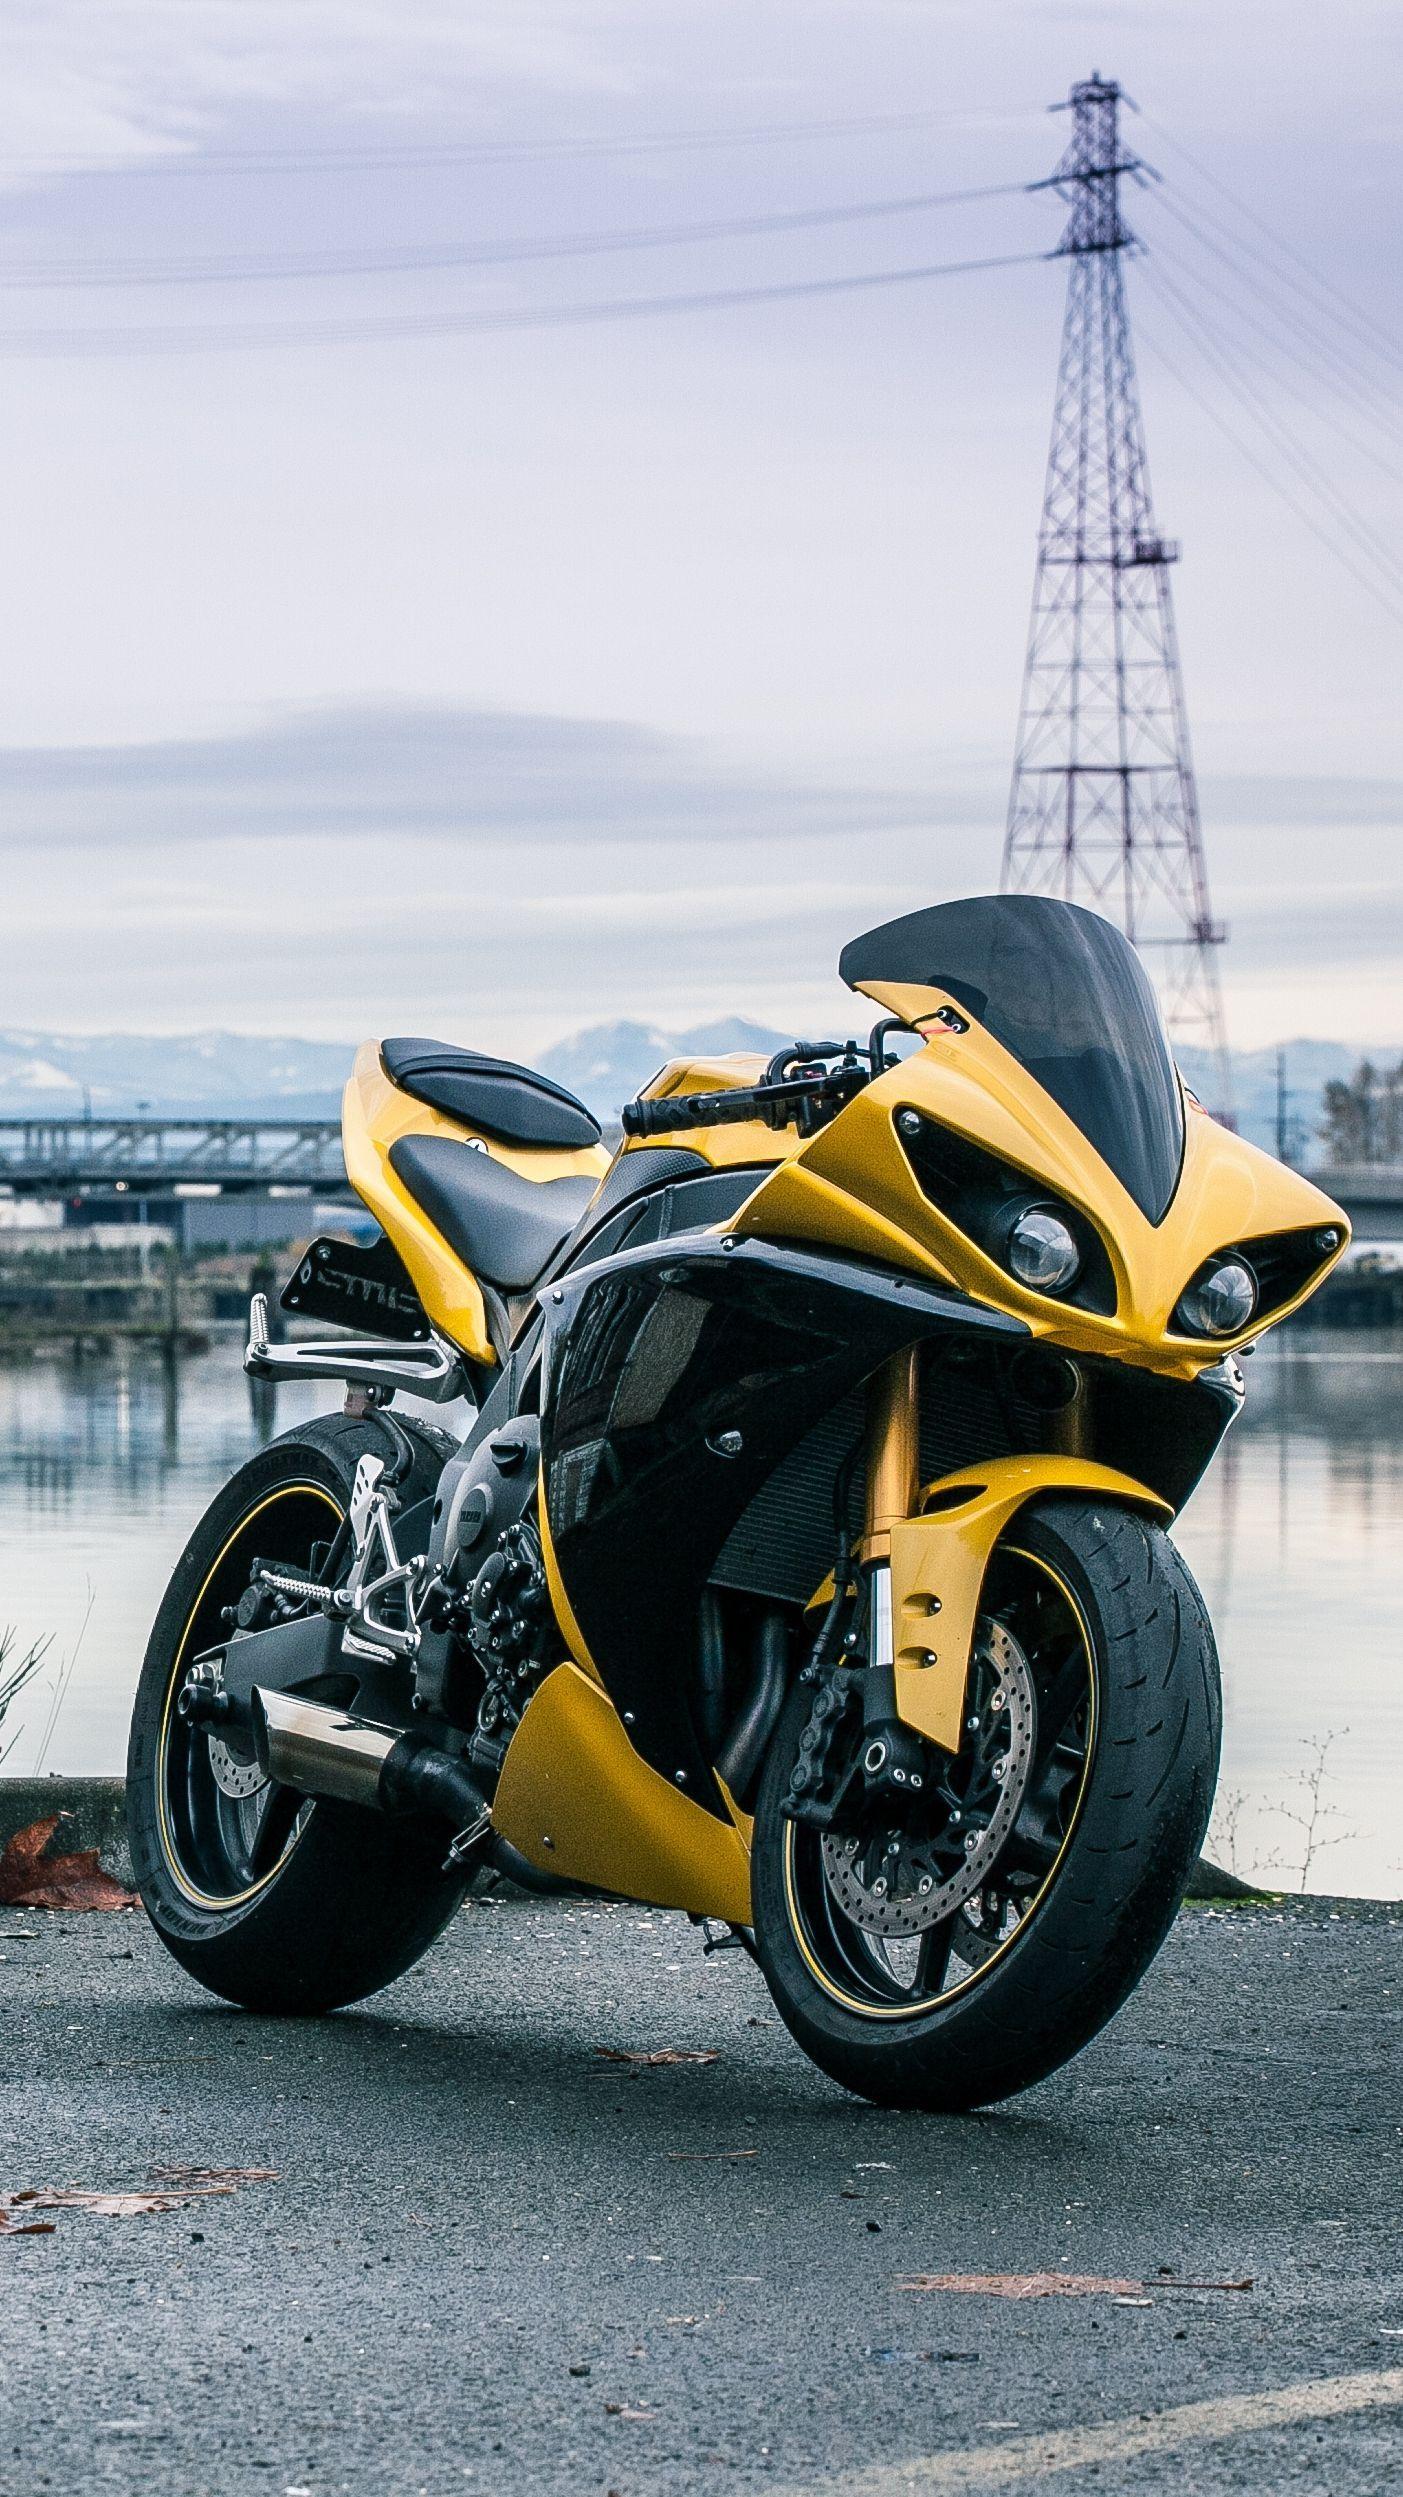 iPhone Wallpaper for iPhone iPhone 8 Plus, iPhone 6s, iPhone 6s Plus, iPhone X and iPod Touch High Quality Wall. Yamaha r Yamaha motorcycles, Best motorbike